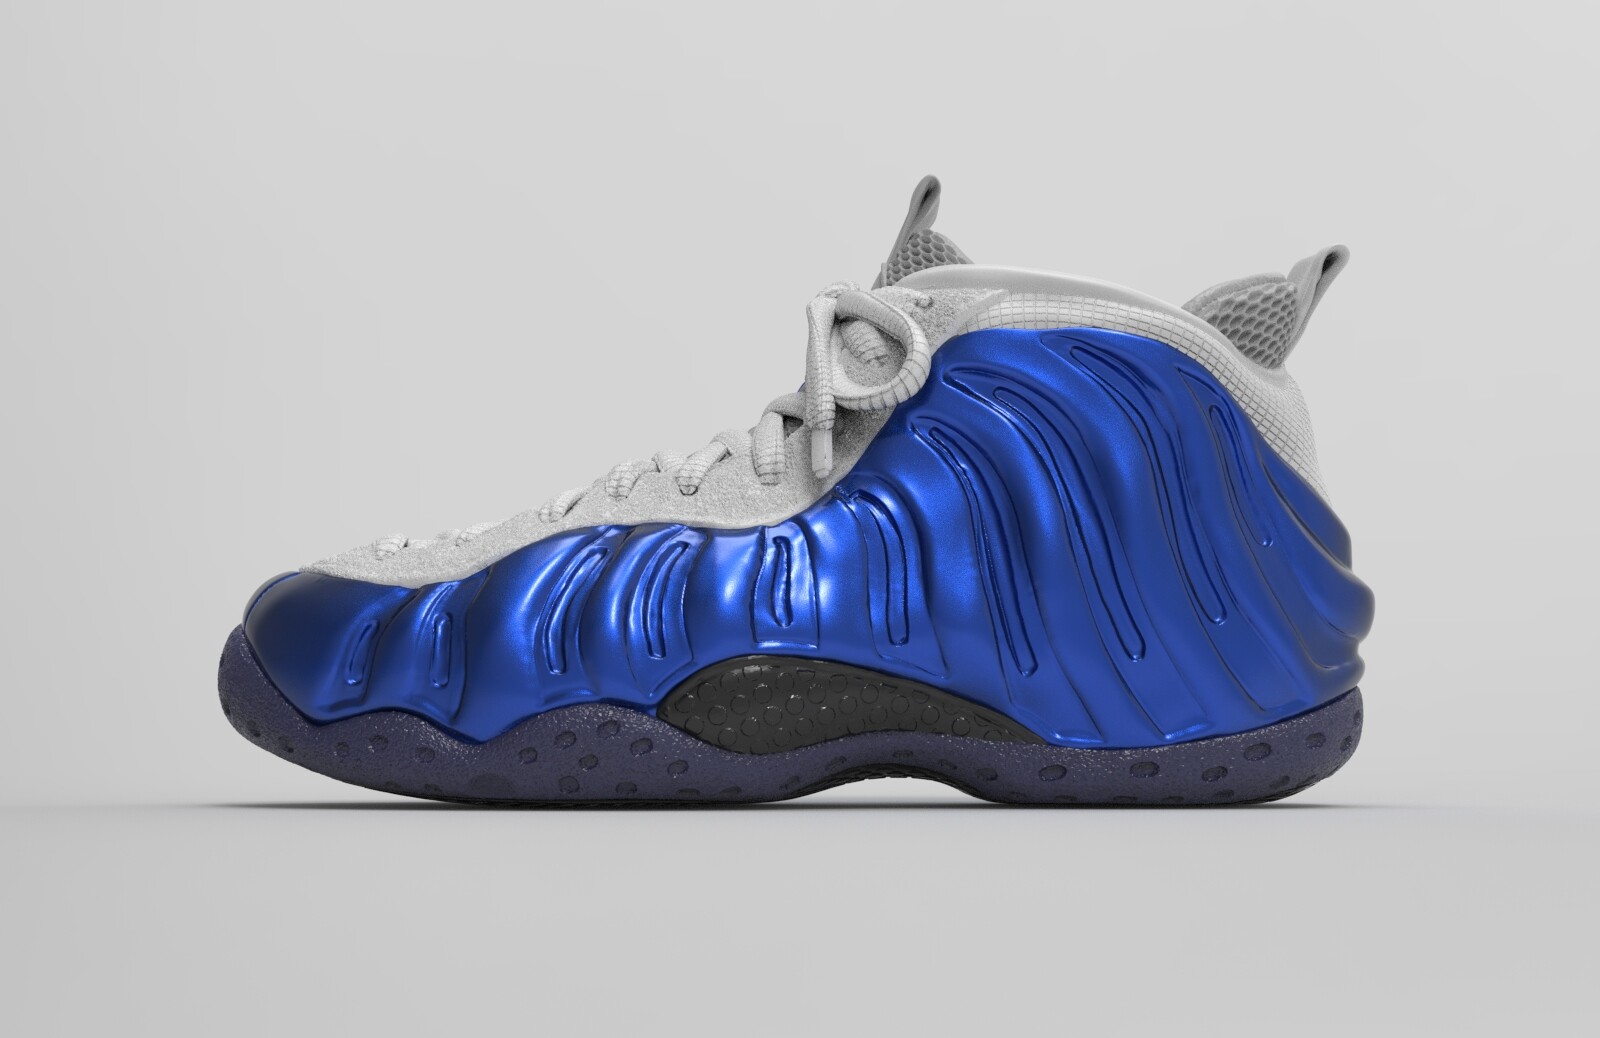 ArtStation - Basketball Shoes -Nike-Air-Foamposite | Resources